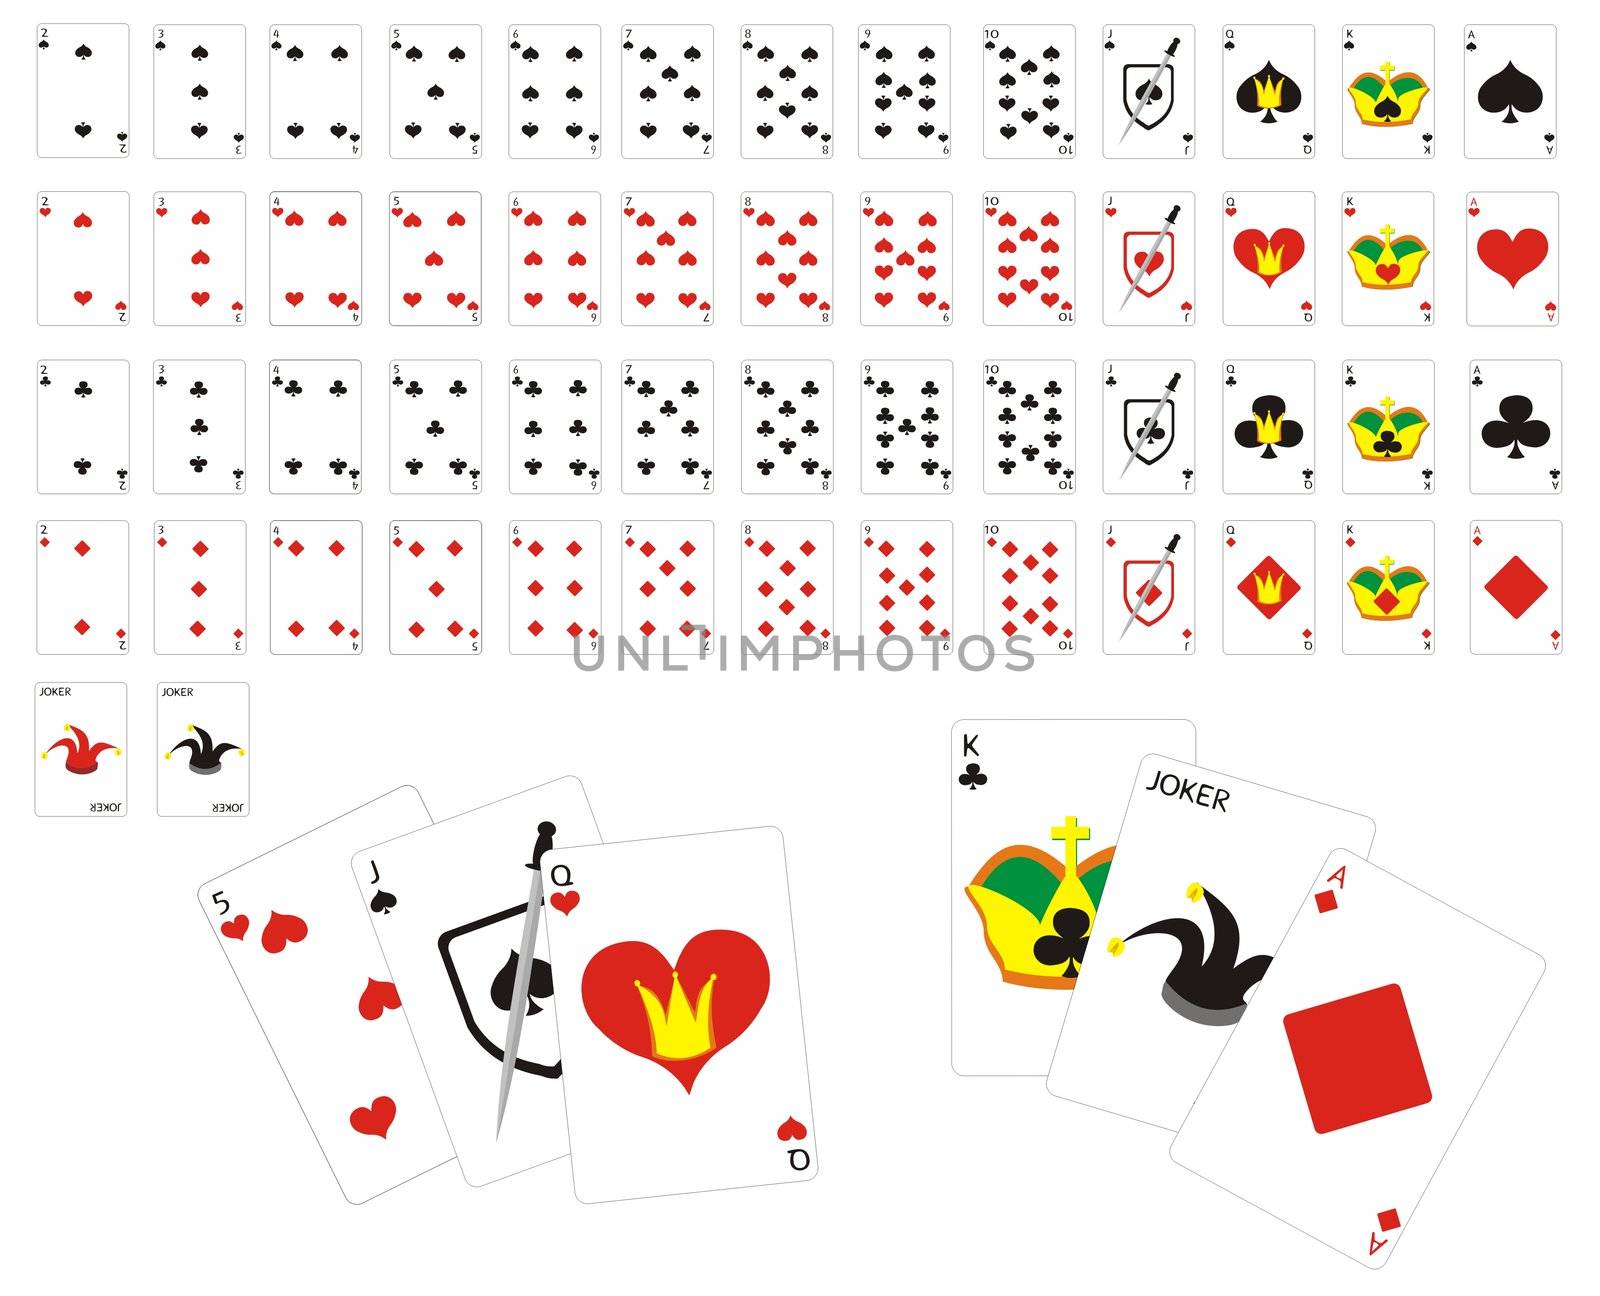 Full deck of playing cards by brigg